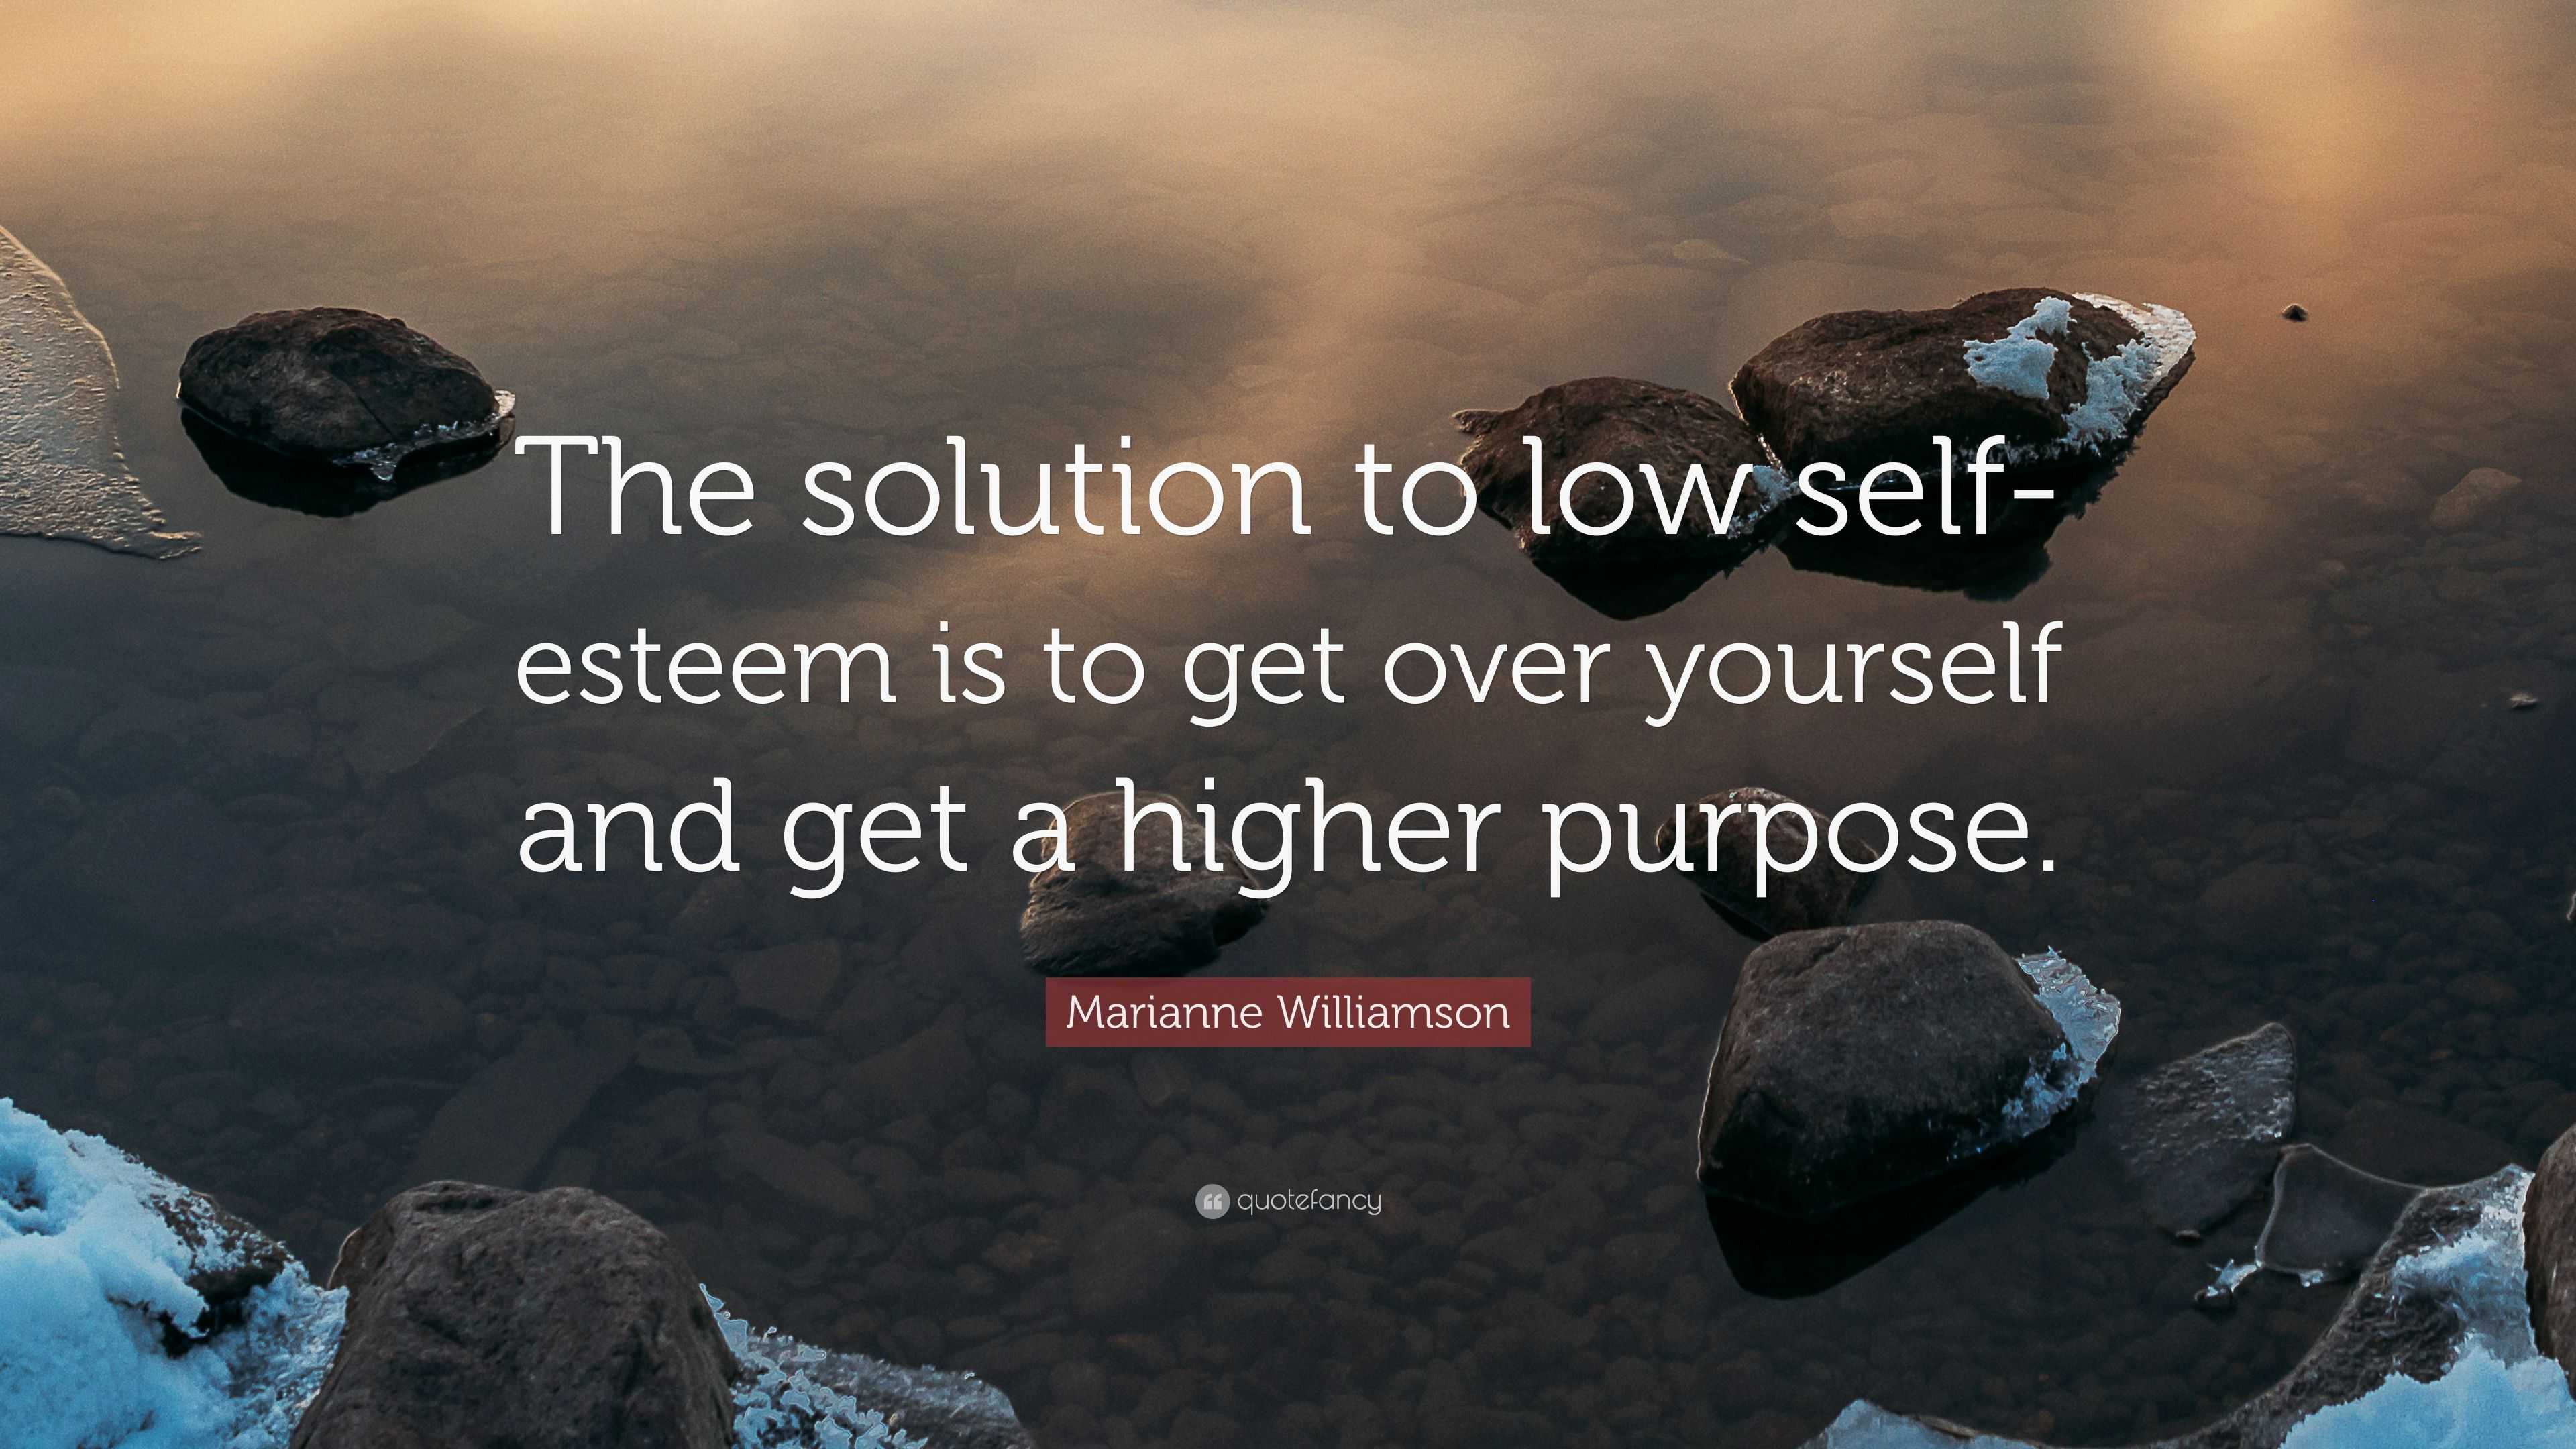 Marianne Williamson Quote: “The solution to low self-esteem is to get ...